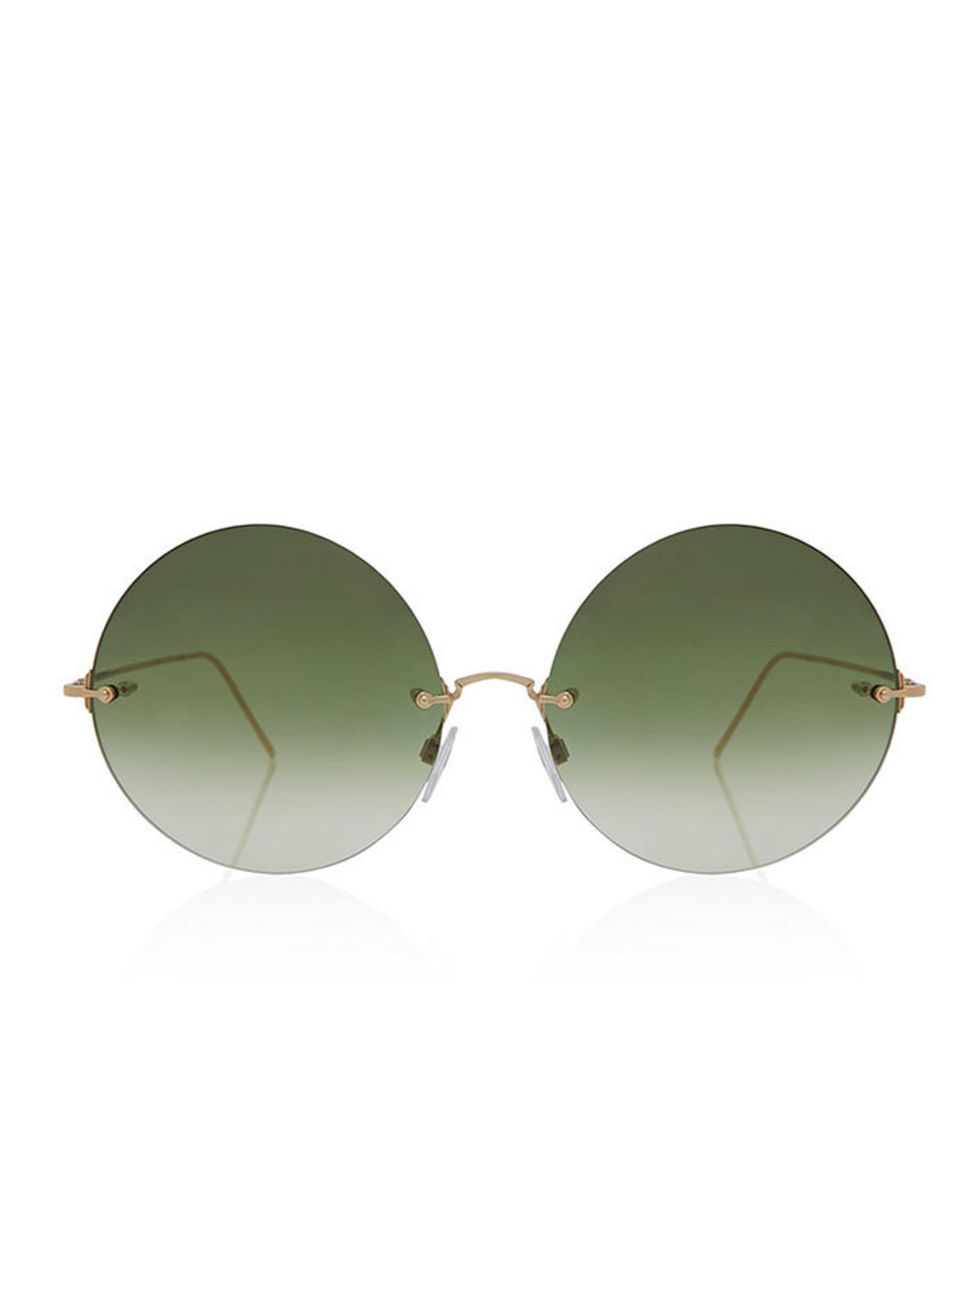 <p>All Rounders .. </p>

<p> </p>

<p> <a href="http://www.liberty.co.uk/fcp/product/Liberty//Khaki-Large-Round-Rimless-Sunglasses/112111" target="_blank">Victoria Beckham</a> Sunglasses £350</p>